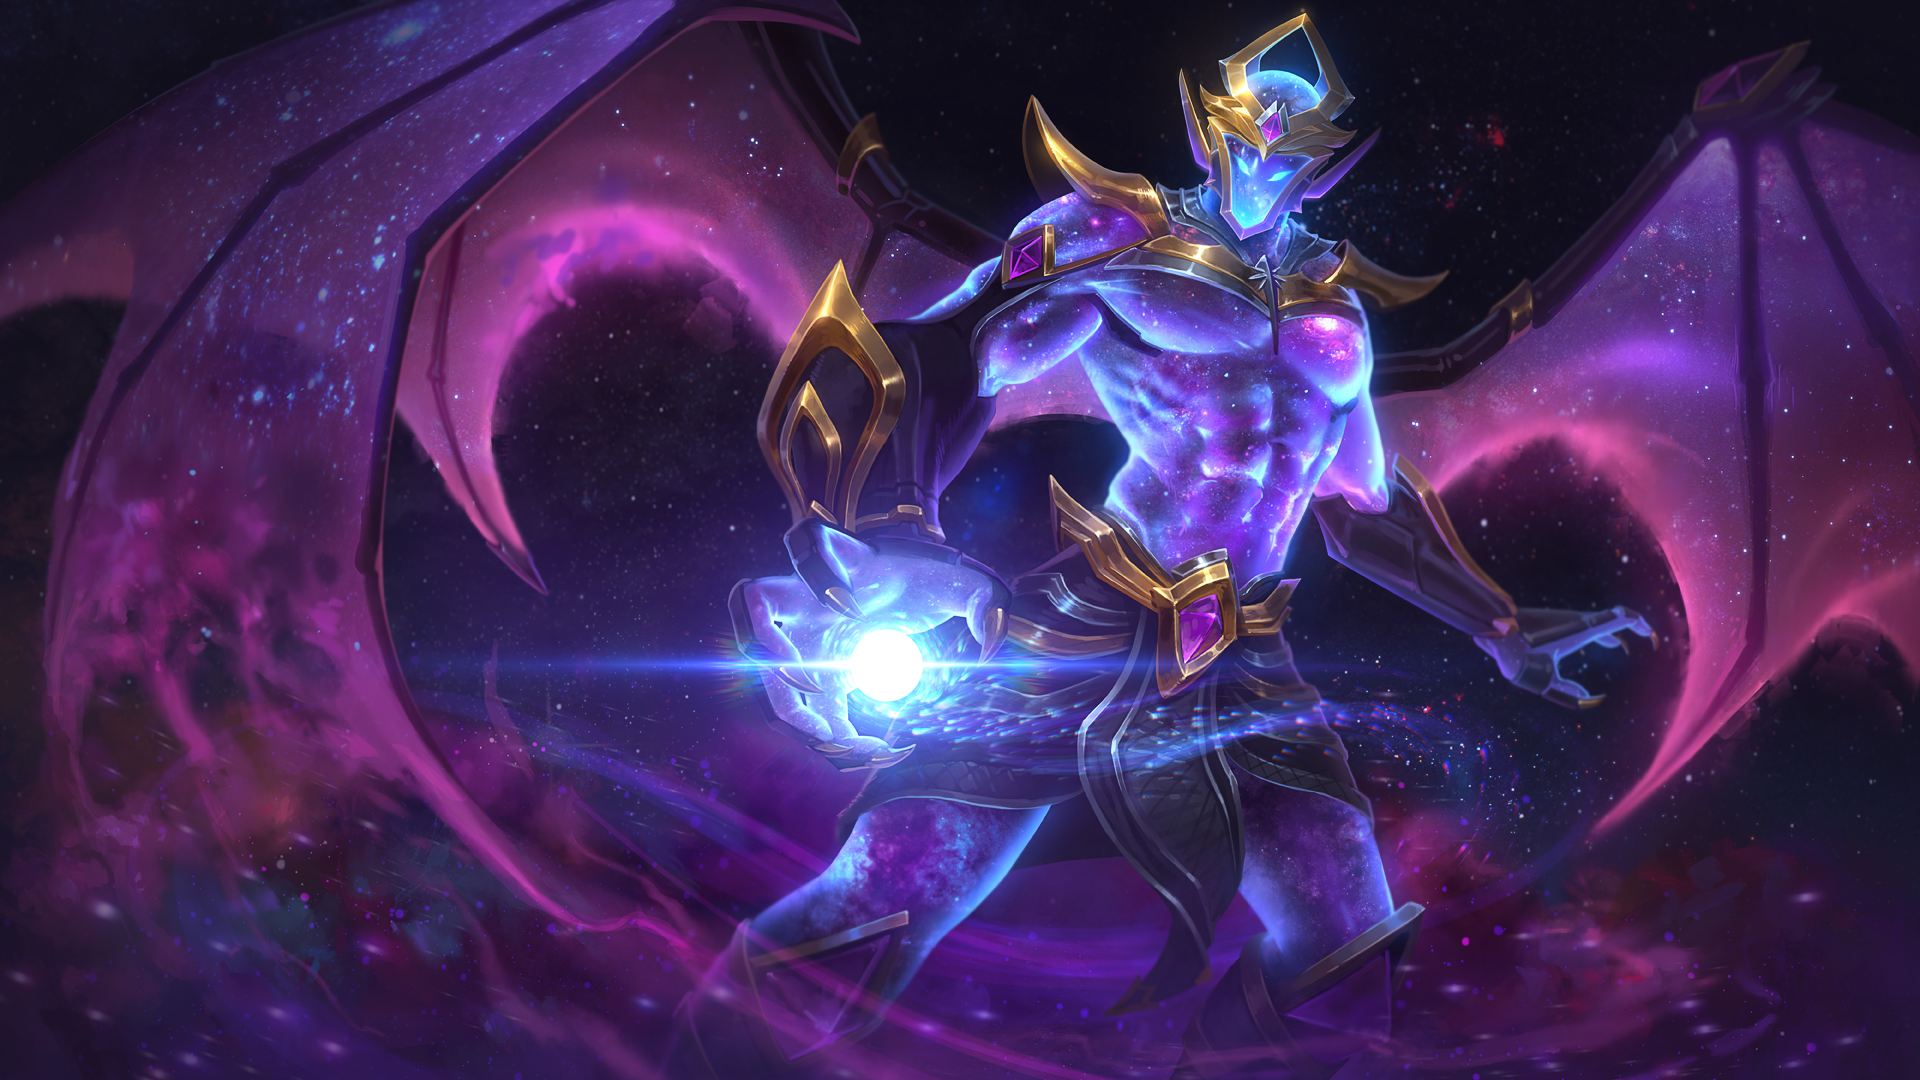 SMITE God Chernobog Lord of Darkness Wallpapers